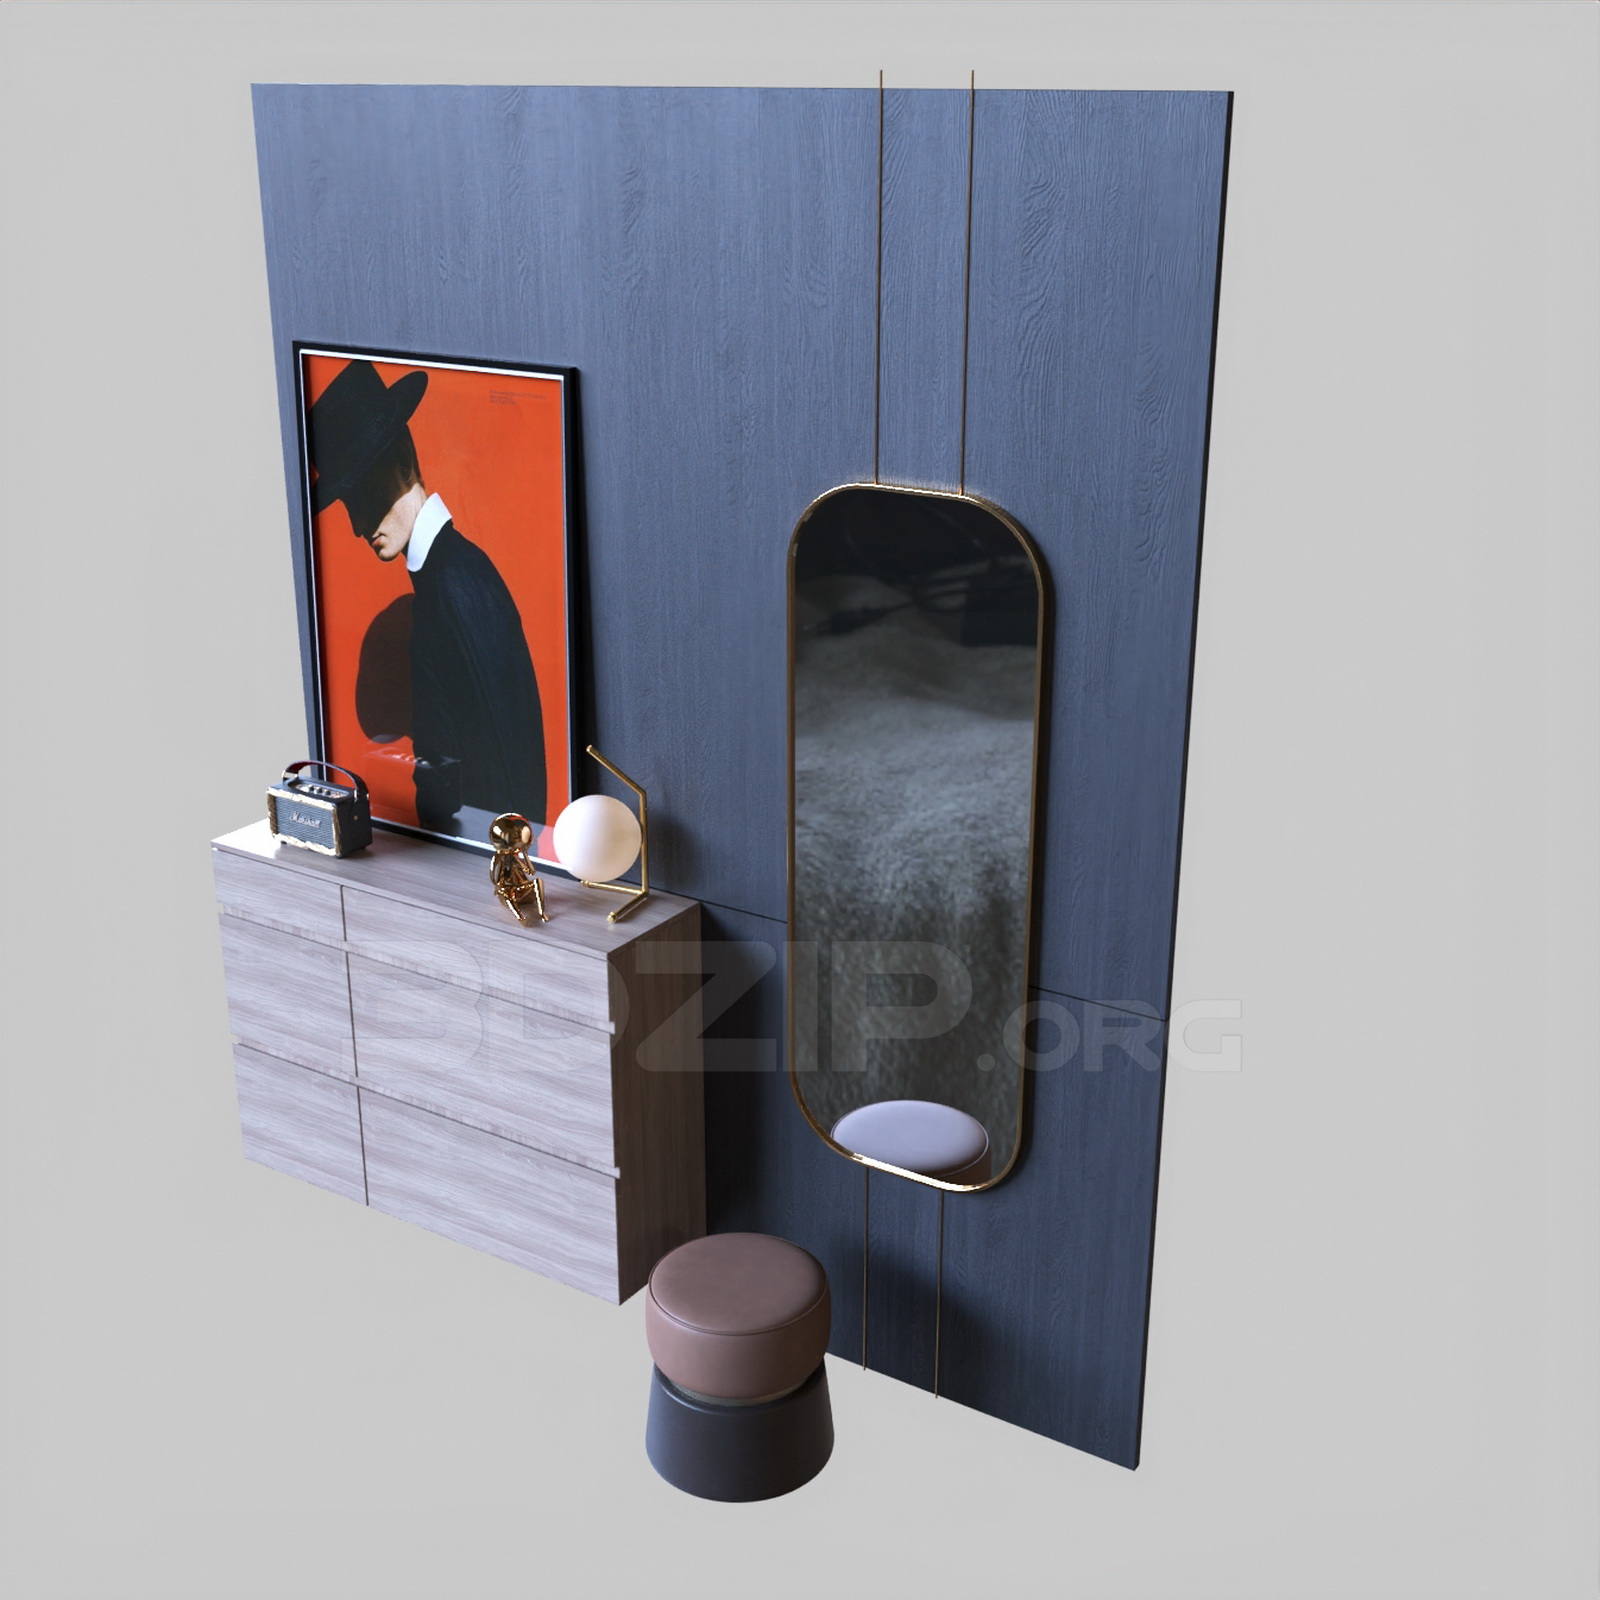 12227. Download Free Shoe Cabinet Model By Quang hieu